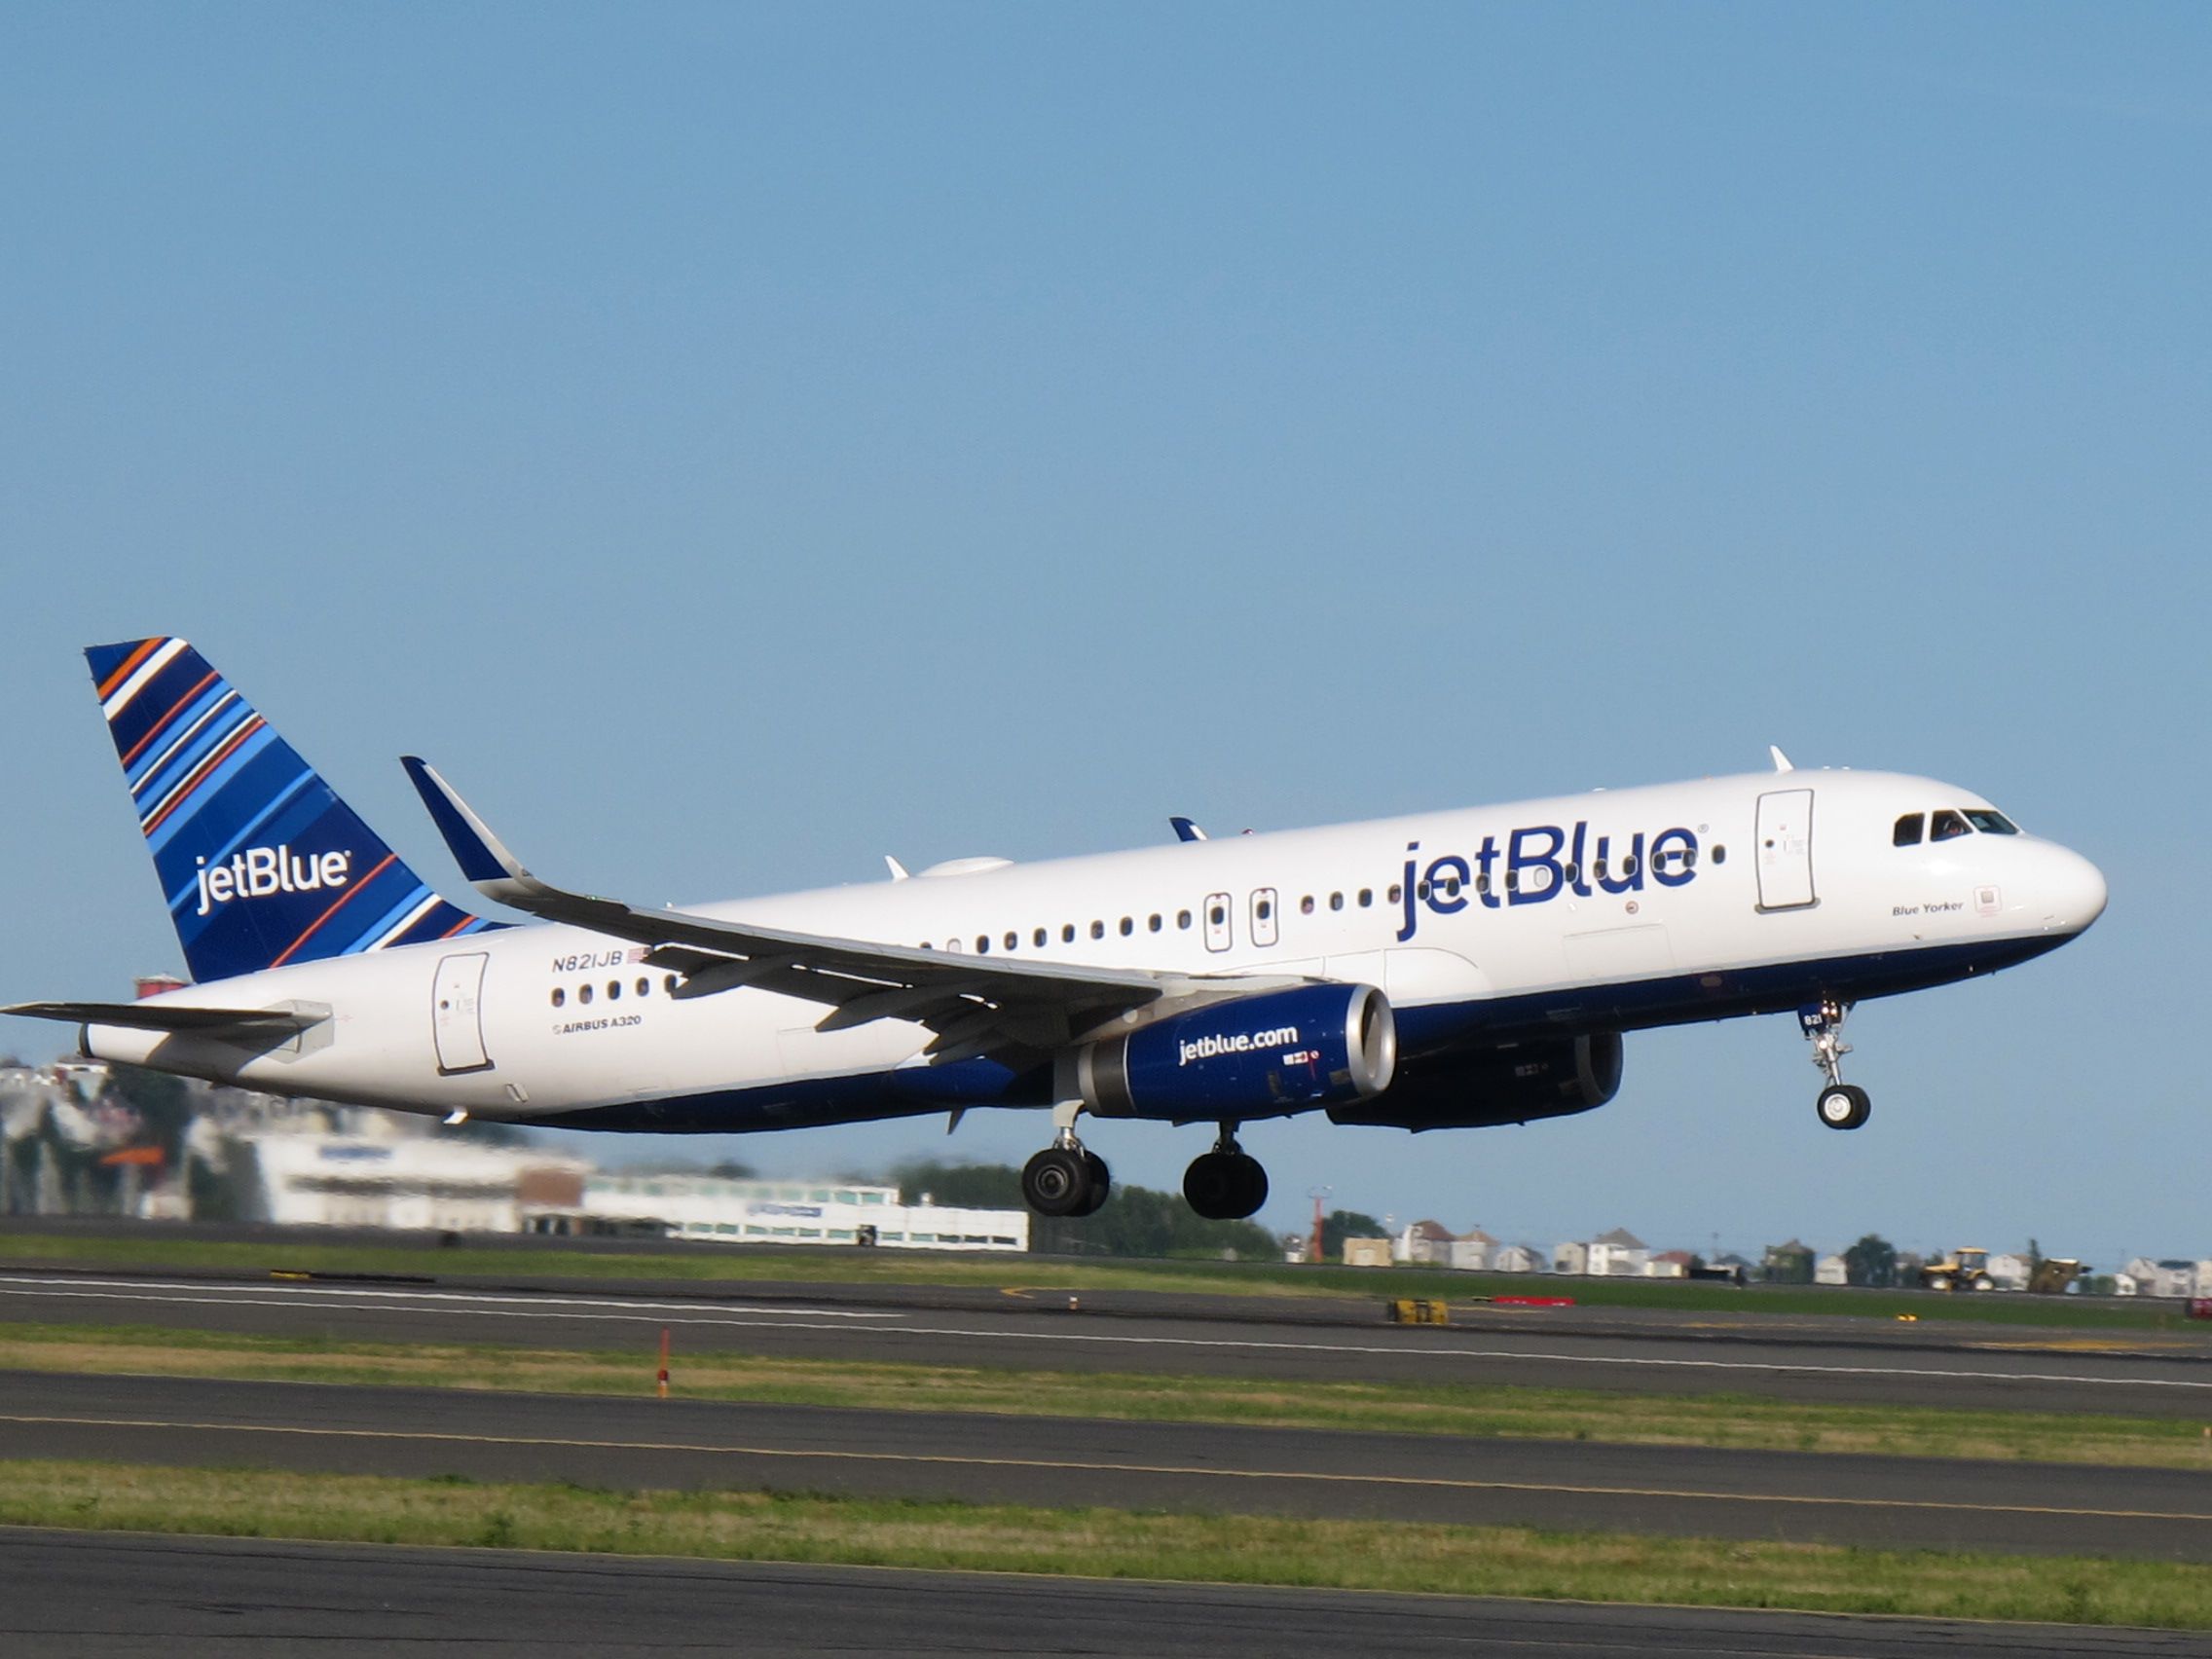 A JetBlue-branded Airbus aircraft taking off